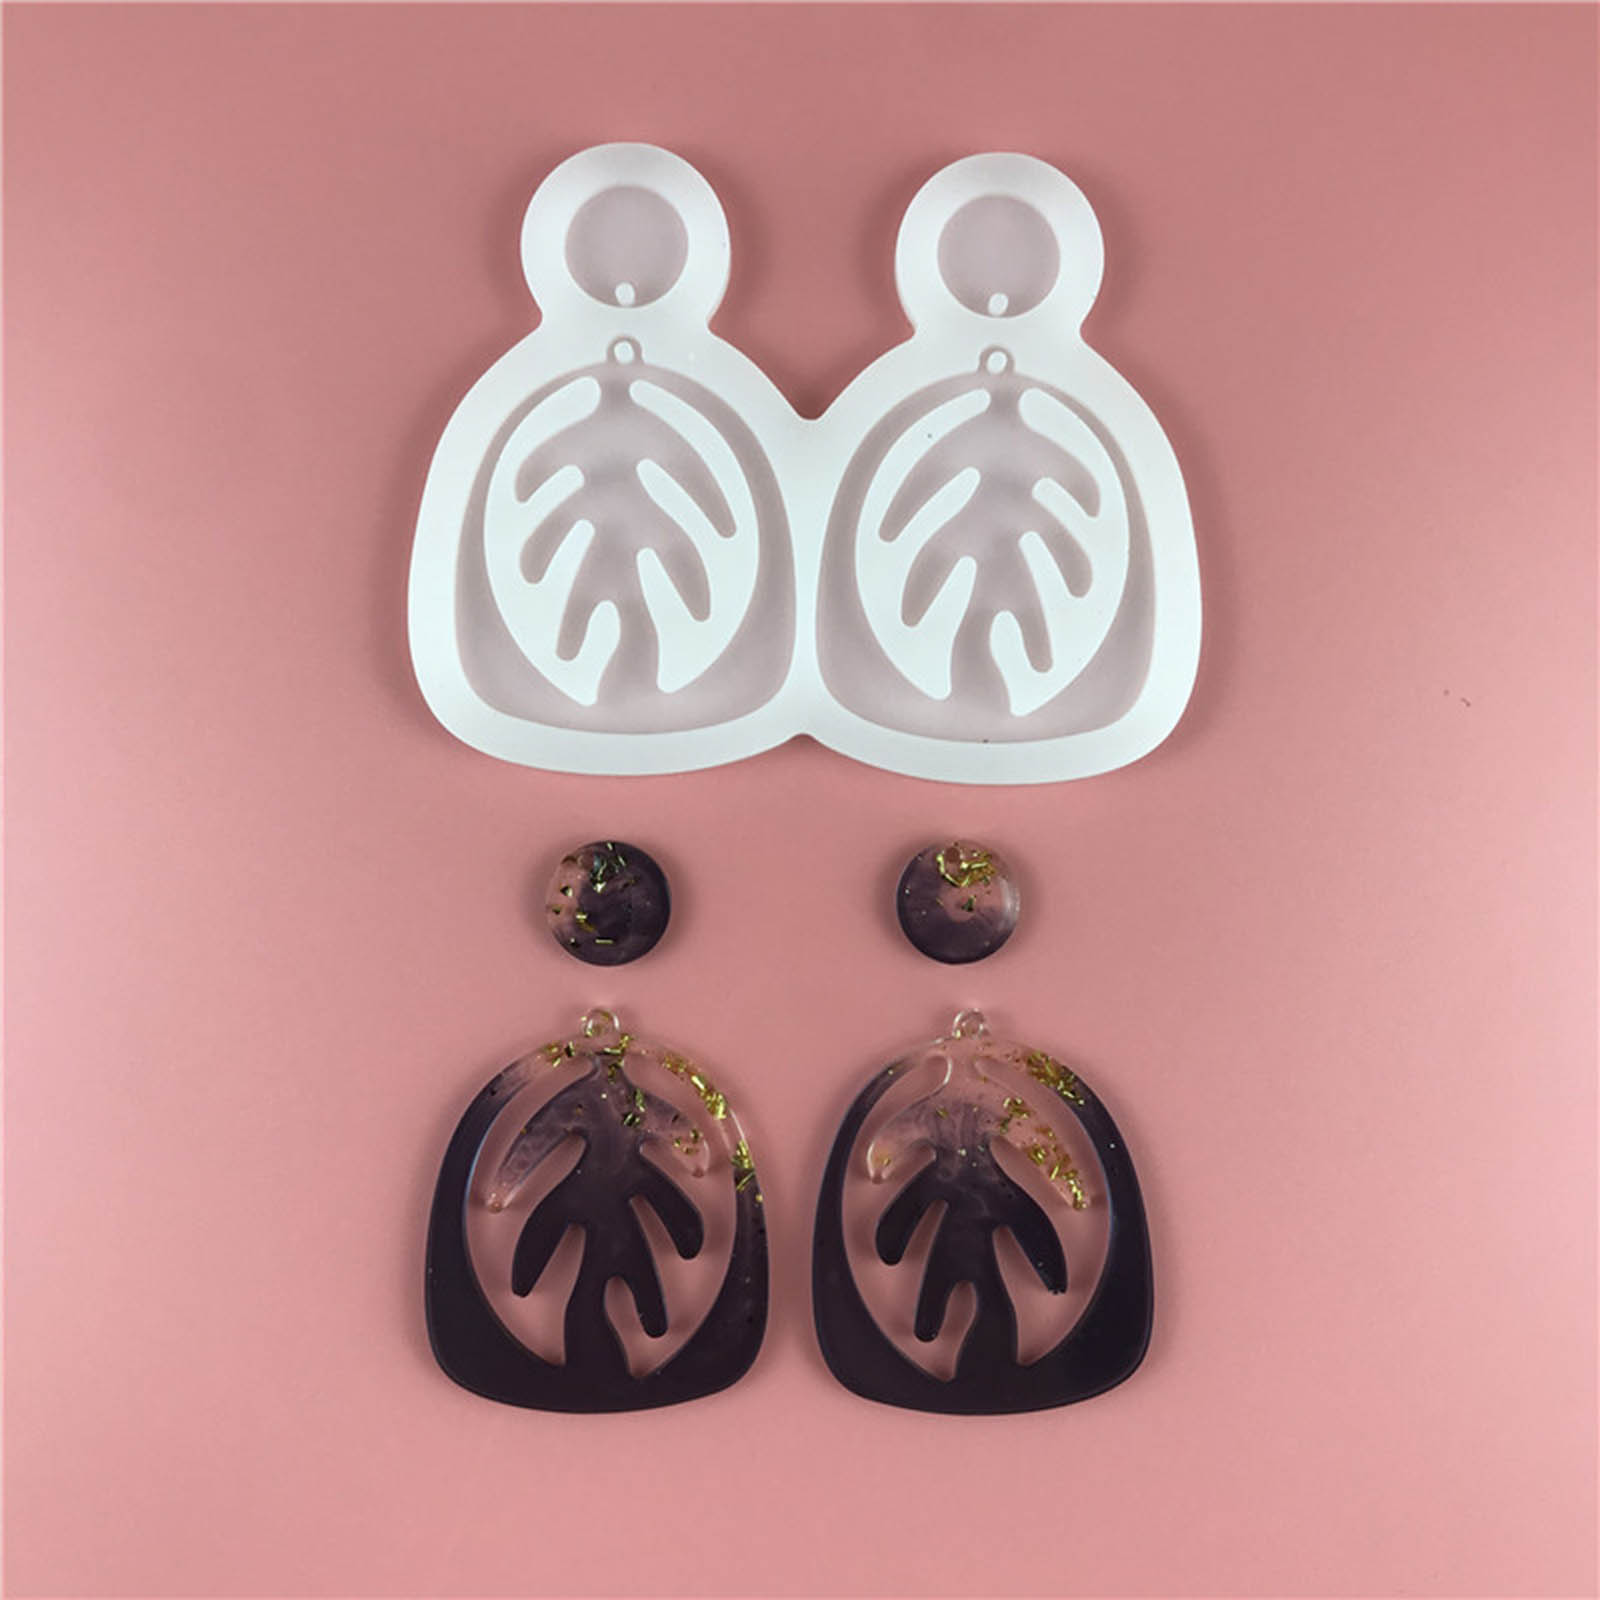 Picture of Silicone Resin Mold For Jewelry Making Earring Pendant Leaf White 11.5cm x 9.3cm, 1 Piece